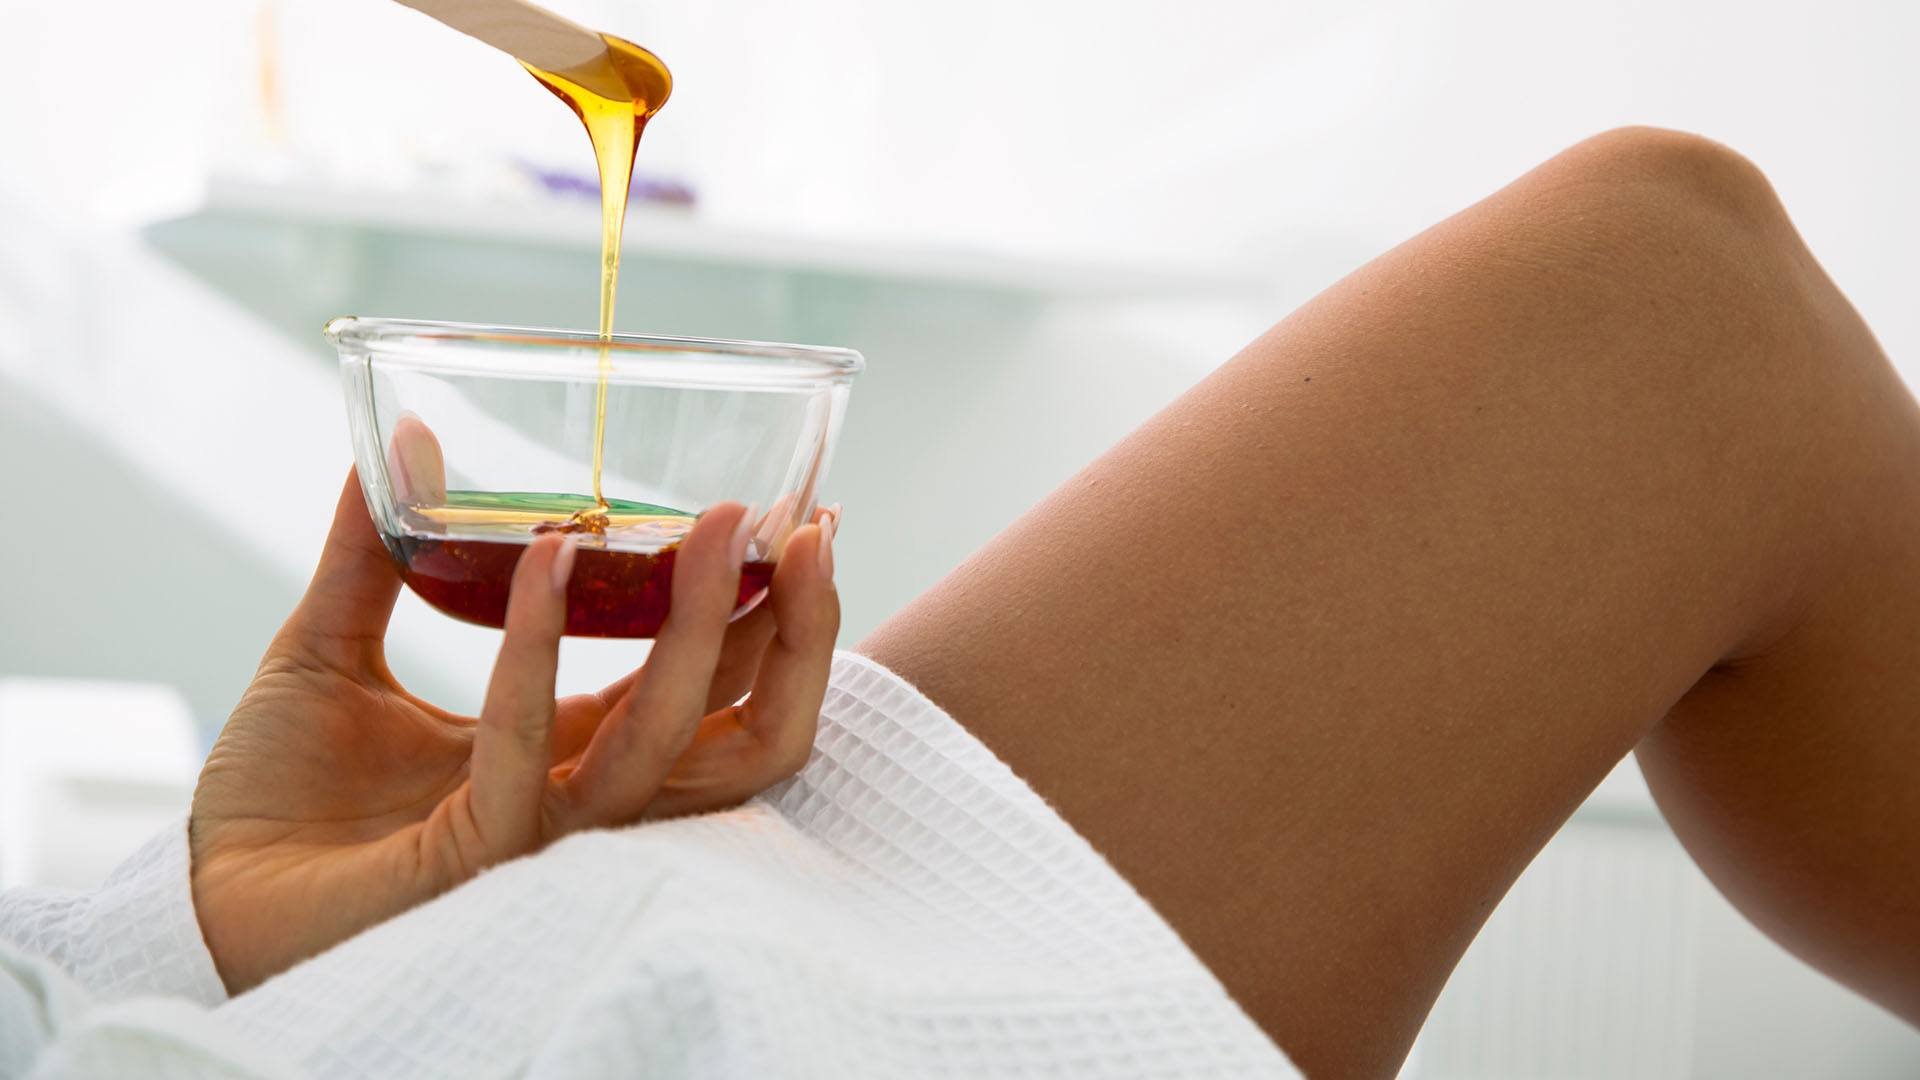 Loreal Paris Article Your Guide to Getting a Brazilian Wax D